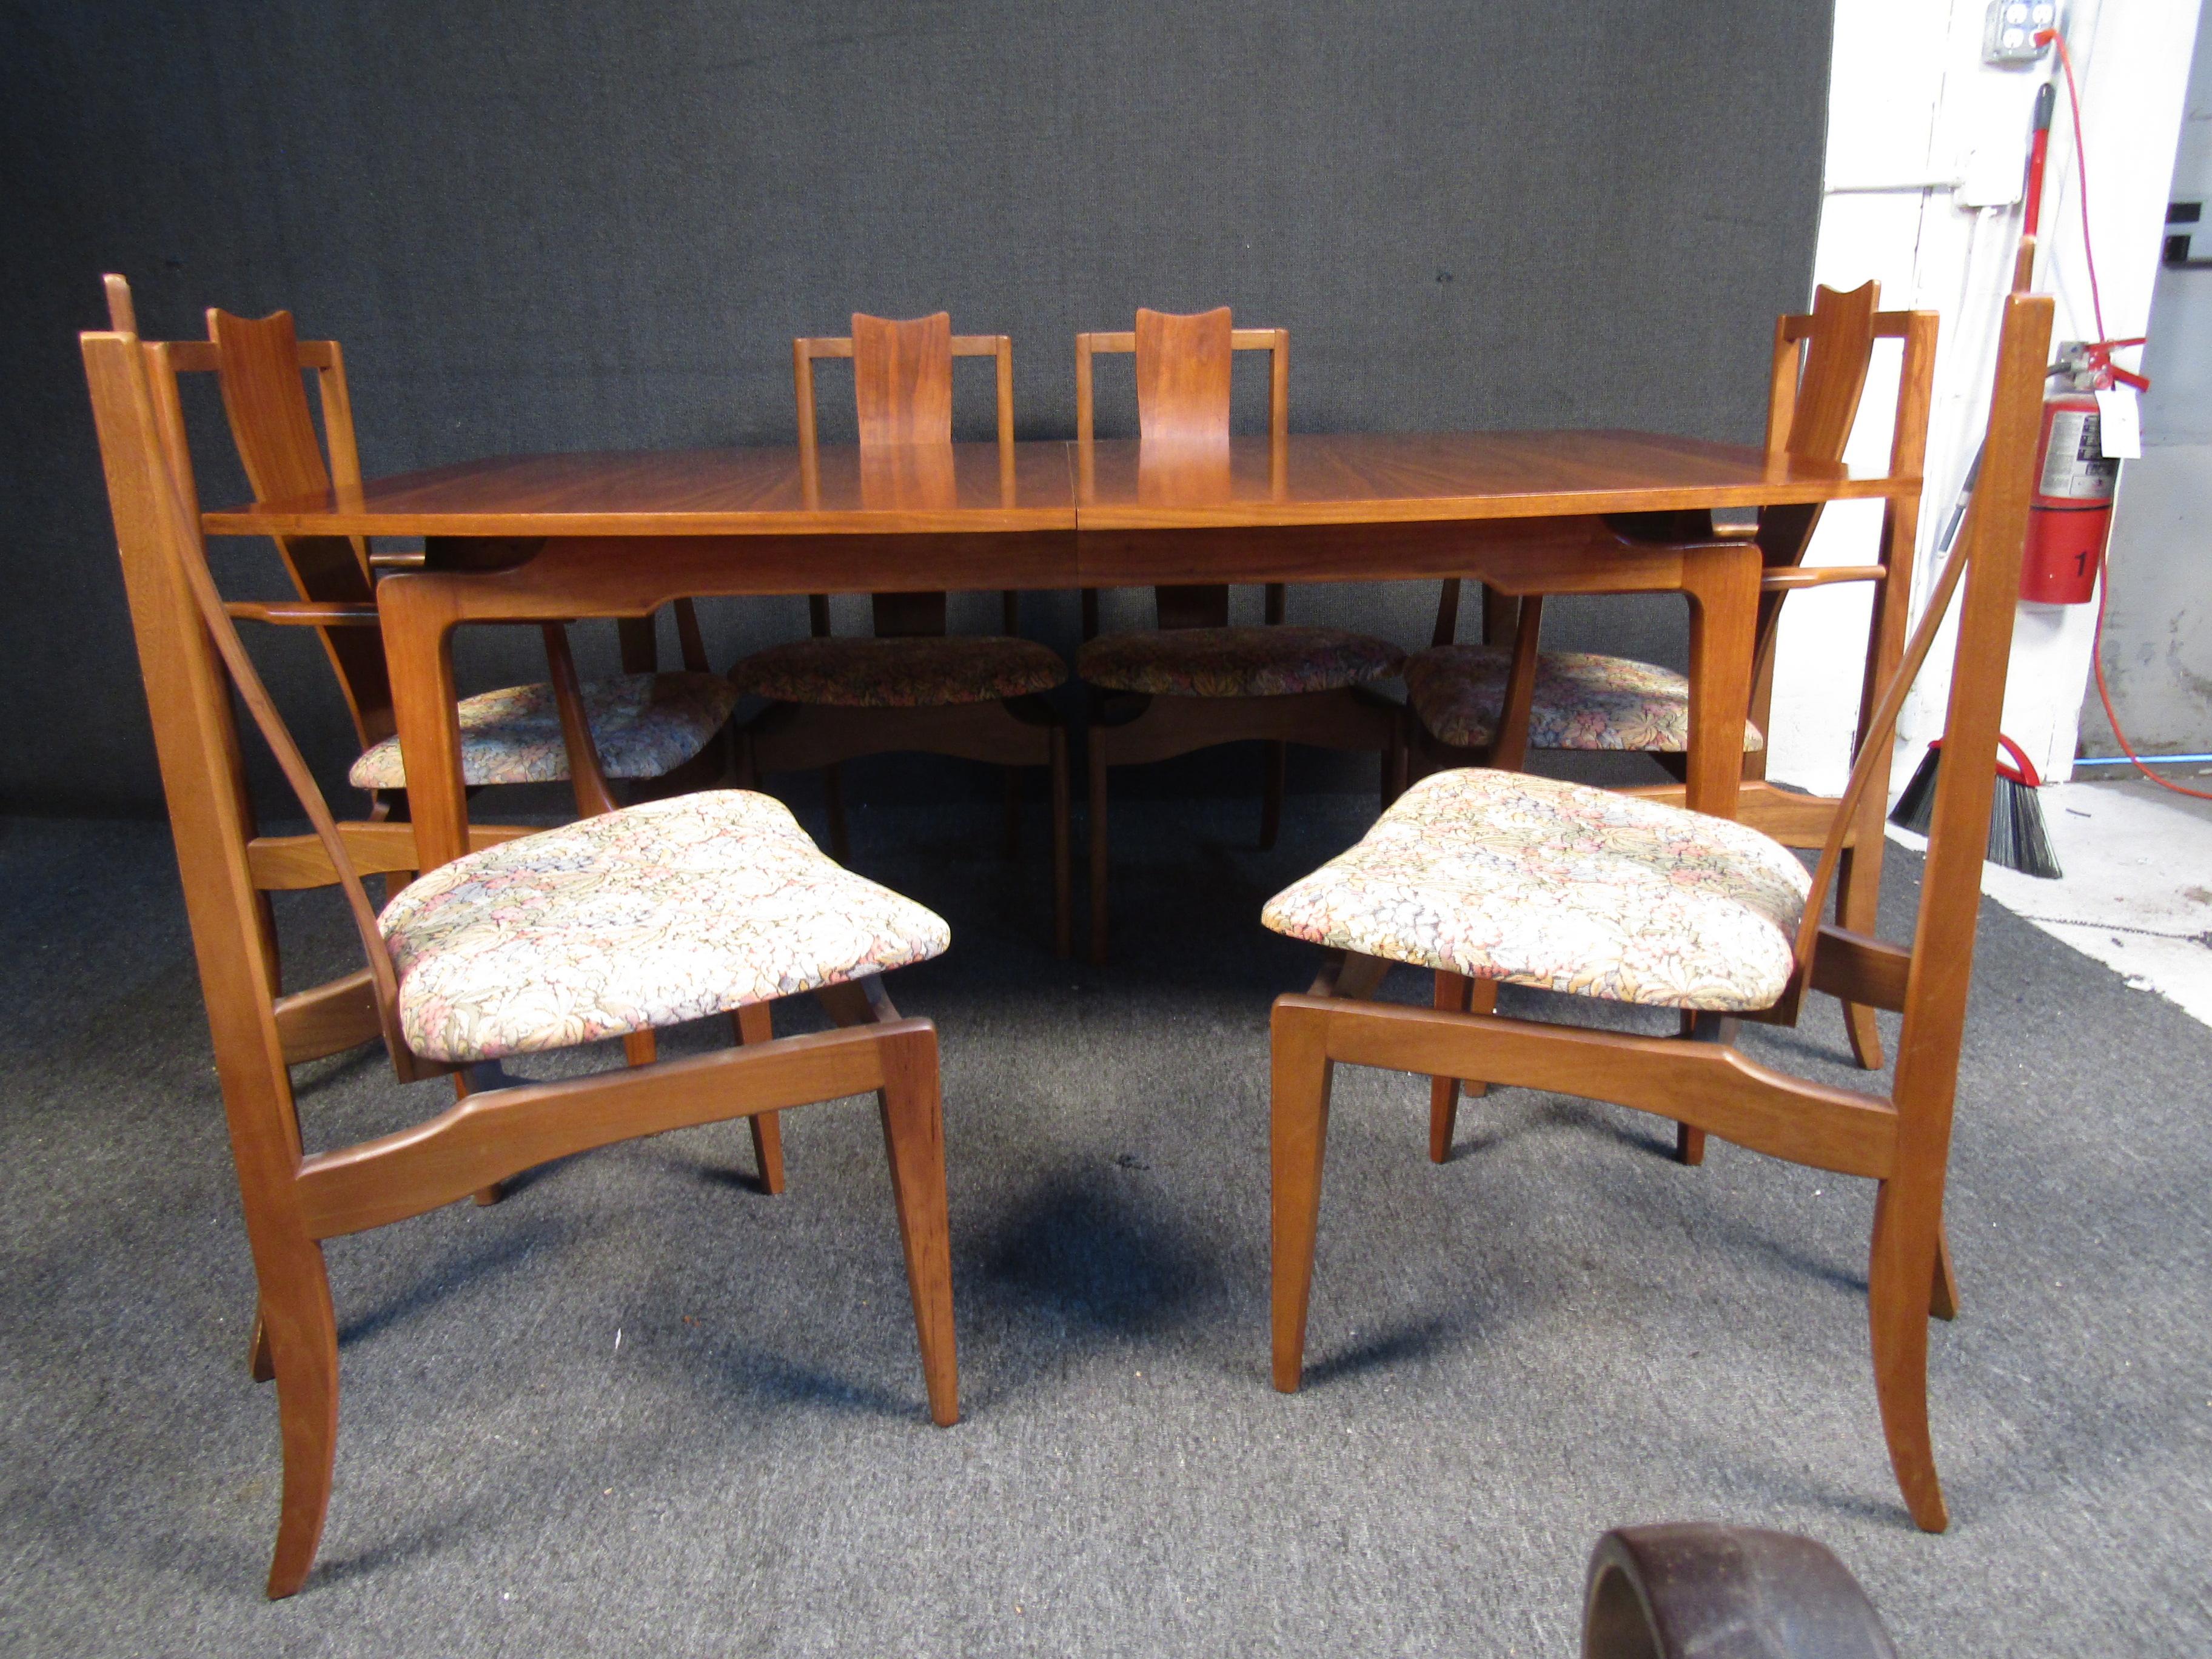 This vintage expanding dining table includes a set of 6 elegant chairs to make a stylish statement in any dining room. When the leaf is expanded, the table measures 103